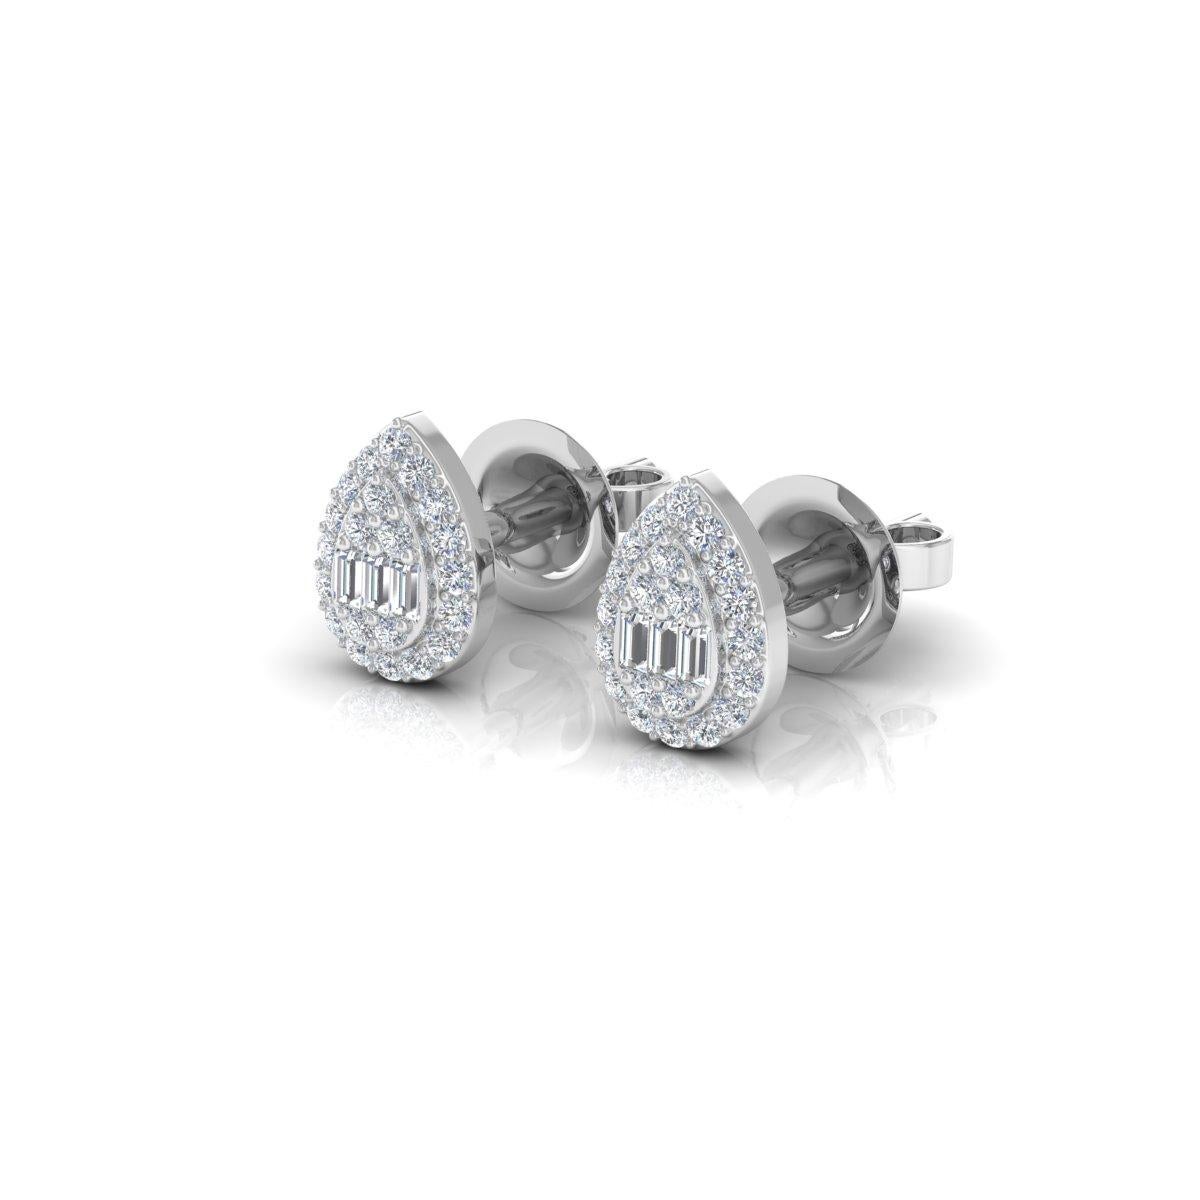 The baguette diamonds, with their sleek and elongated shape, create a sense of modern elegance, while the round diamonds add a touch of classic brilliance and sparkle. Set within the lustrous embrace of 14 Karat White Gold, these diamonds radiate a